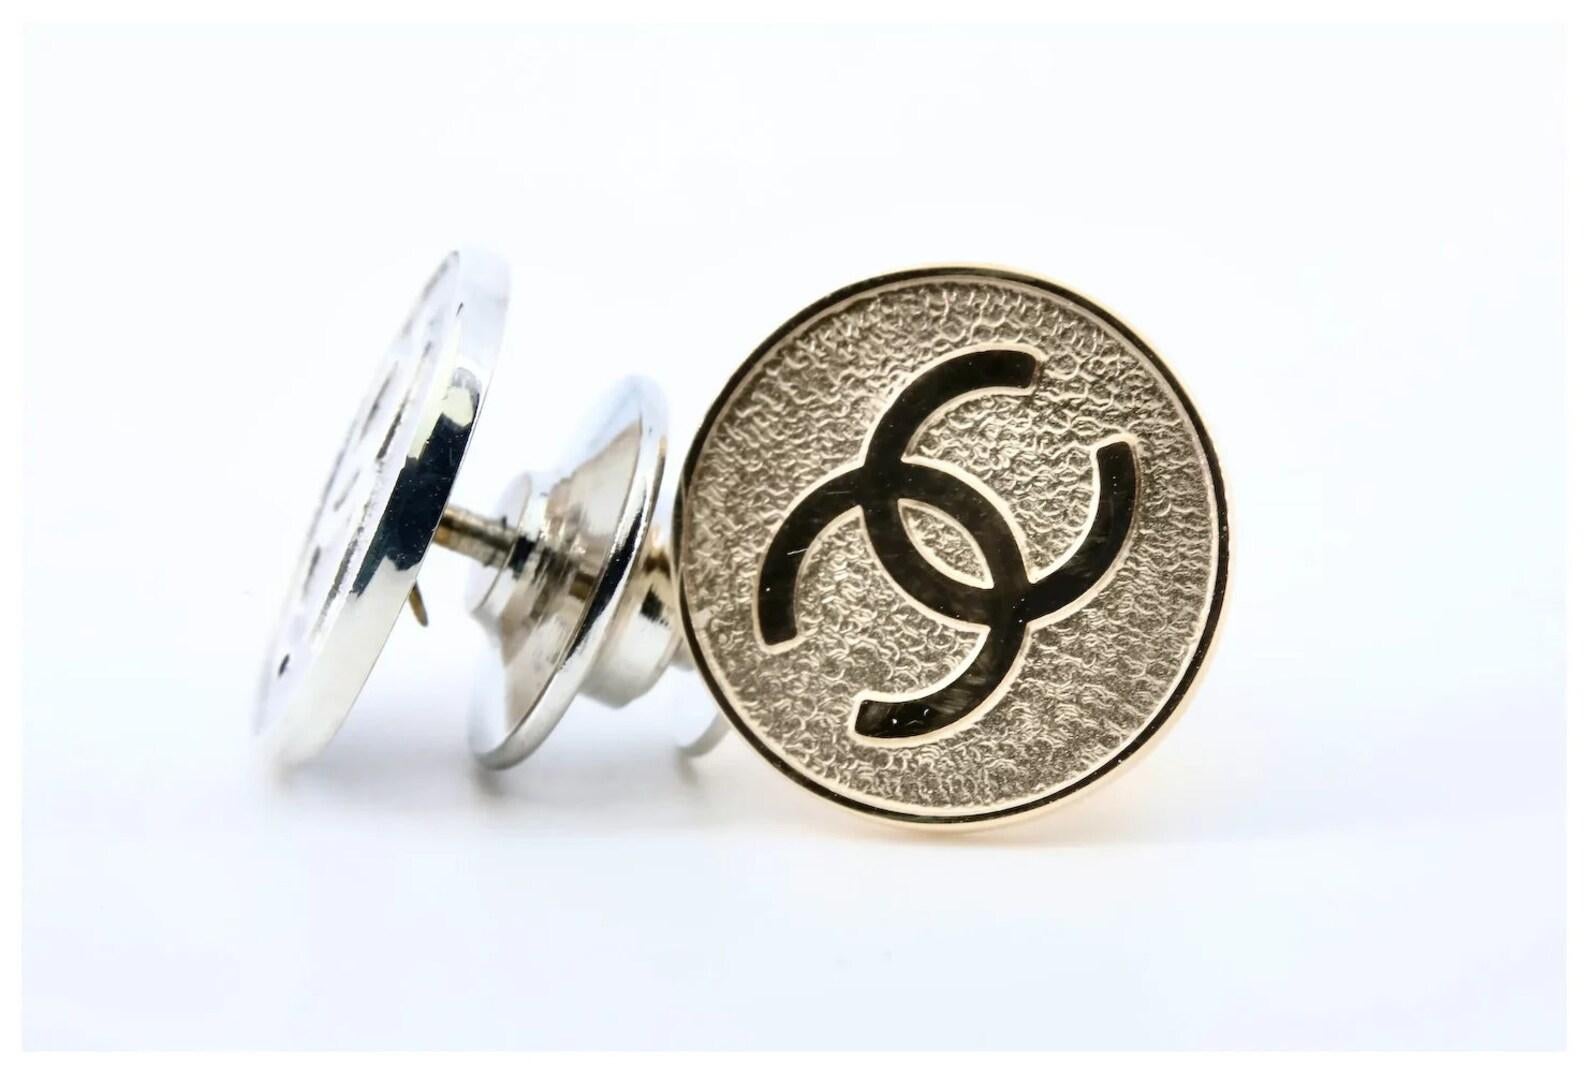 A pair of Tiffany & Company lapel pins for Chanel, one of 14 karat yellow gold and the other of sterling silver.

Displaying the raised polished Chanel logo in center framed by a matte background.

Stamped Tiffany & Co, 14K gold, and Sterling